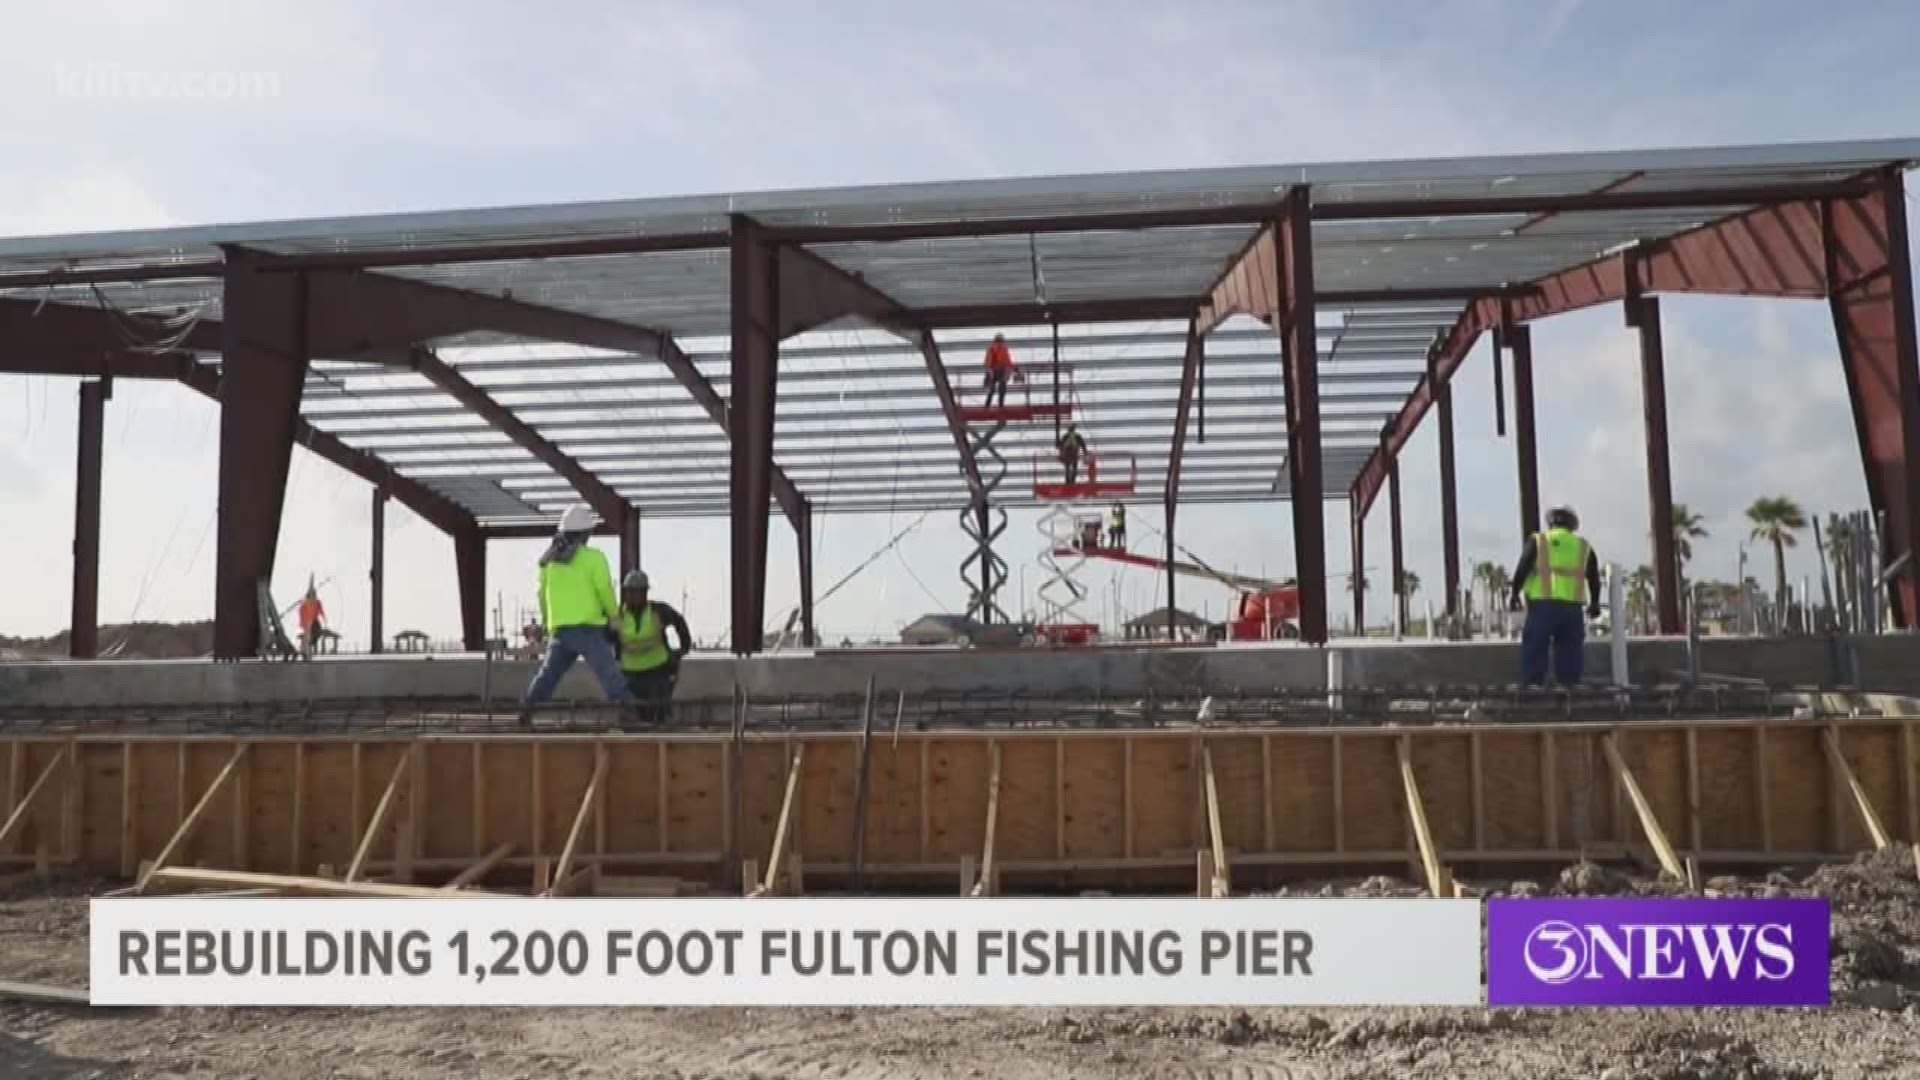 The rebuilding of the Fulton, Texas, fishing pier and convention center destroyed by Hurricane Harvey two years ago will begin on Saturday.